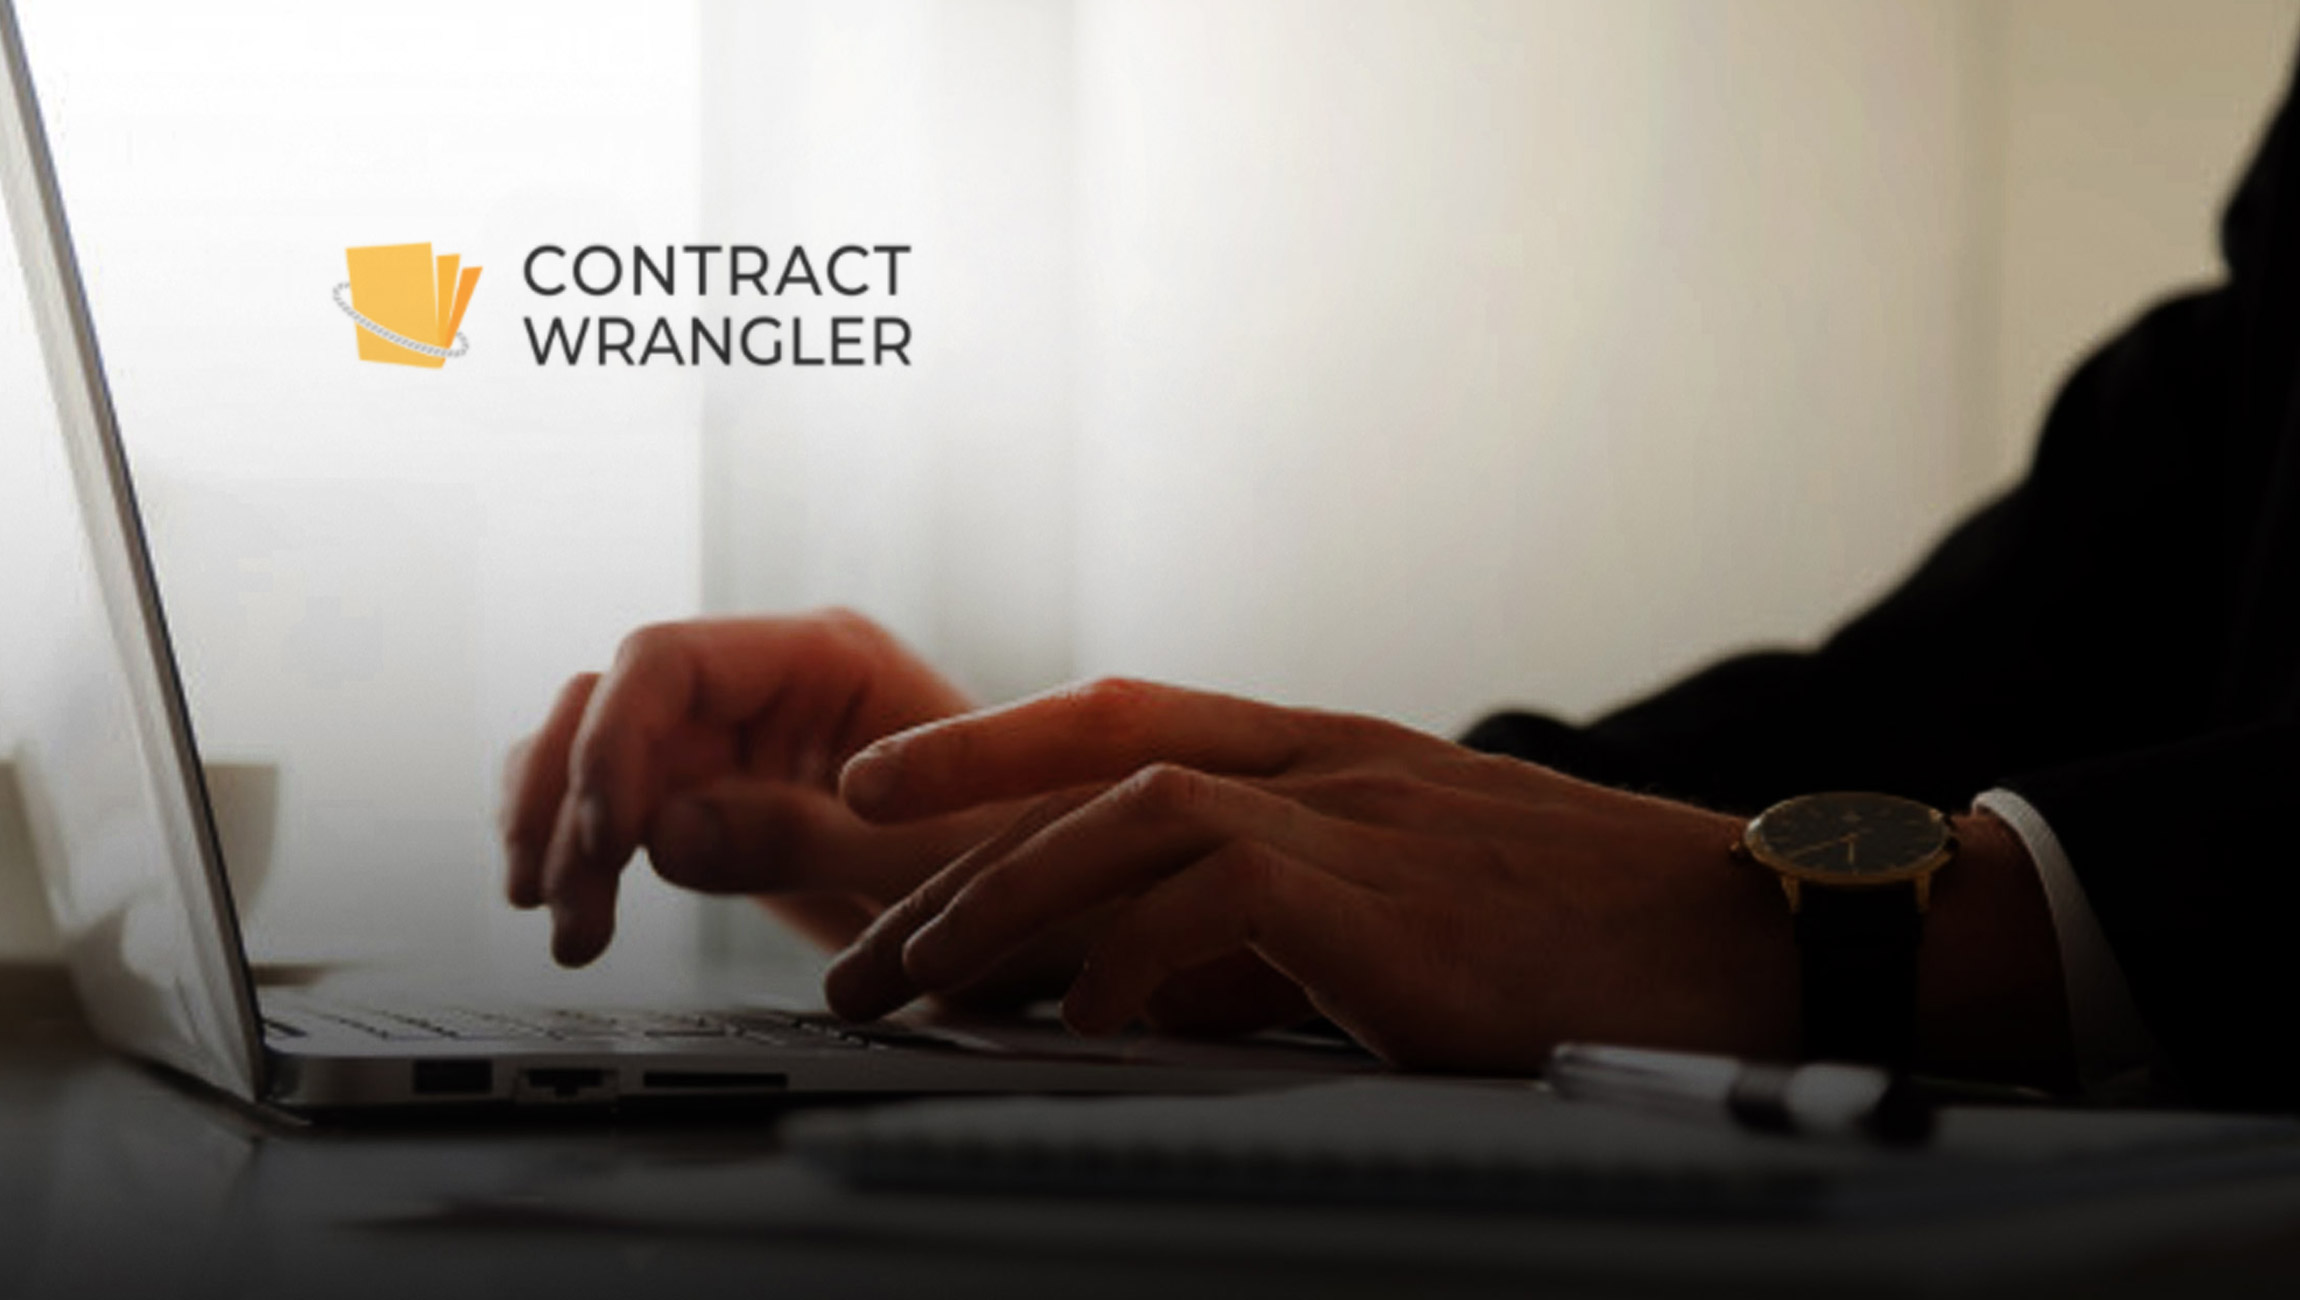 Contract Wrangler Experiences Real Growth As It Transforms Contract Management Through Its Disruptive Solution